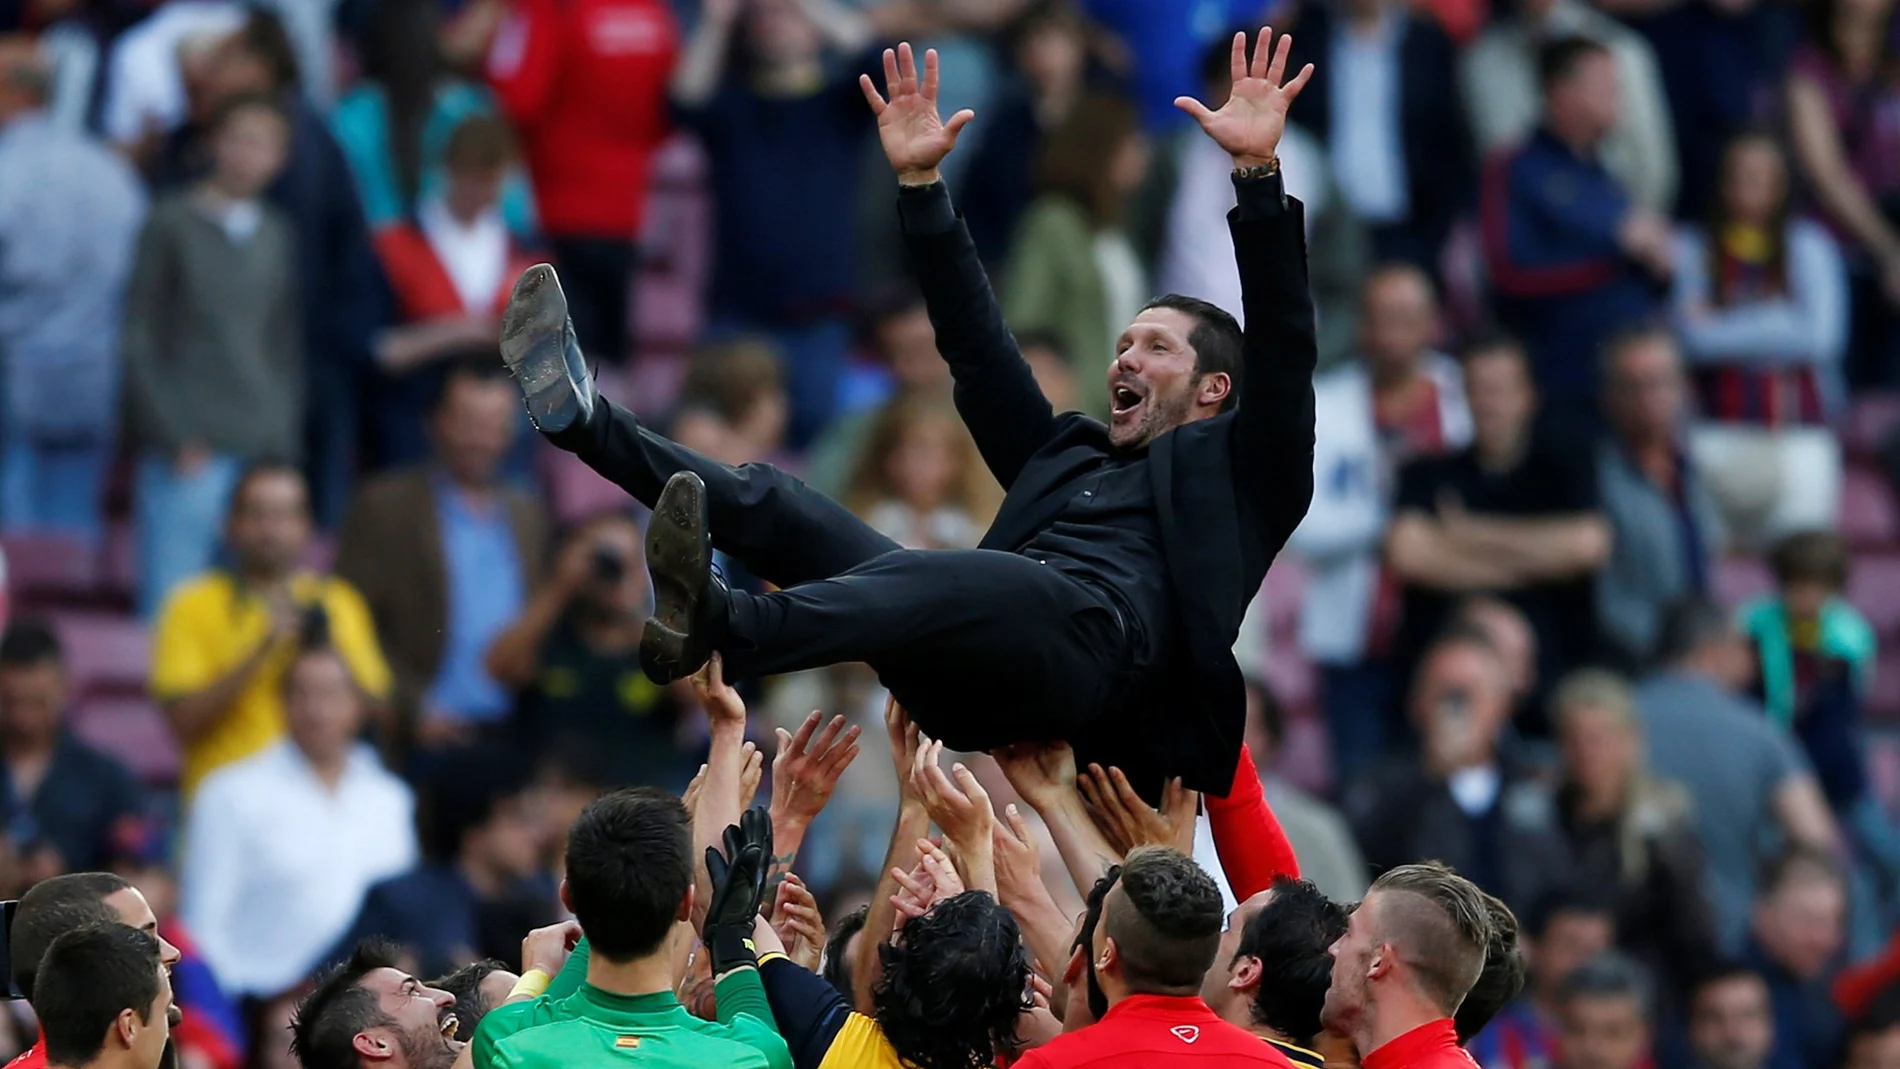 FILE PHOTO: Atletico Madrid coach Diego Simeone celebrates with players after winning the Spanish La Liga title following their 1-1 draw against Barcelona at Camp Nou stadium.